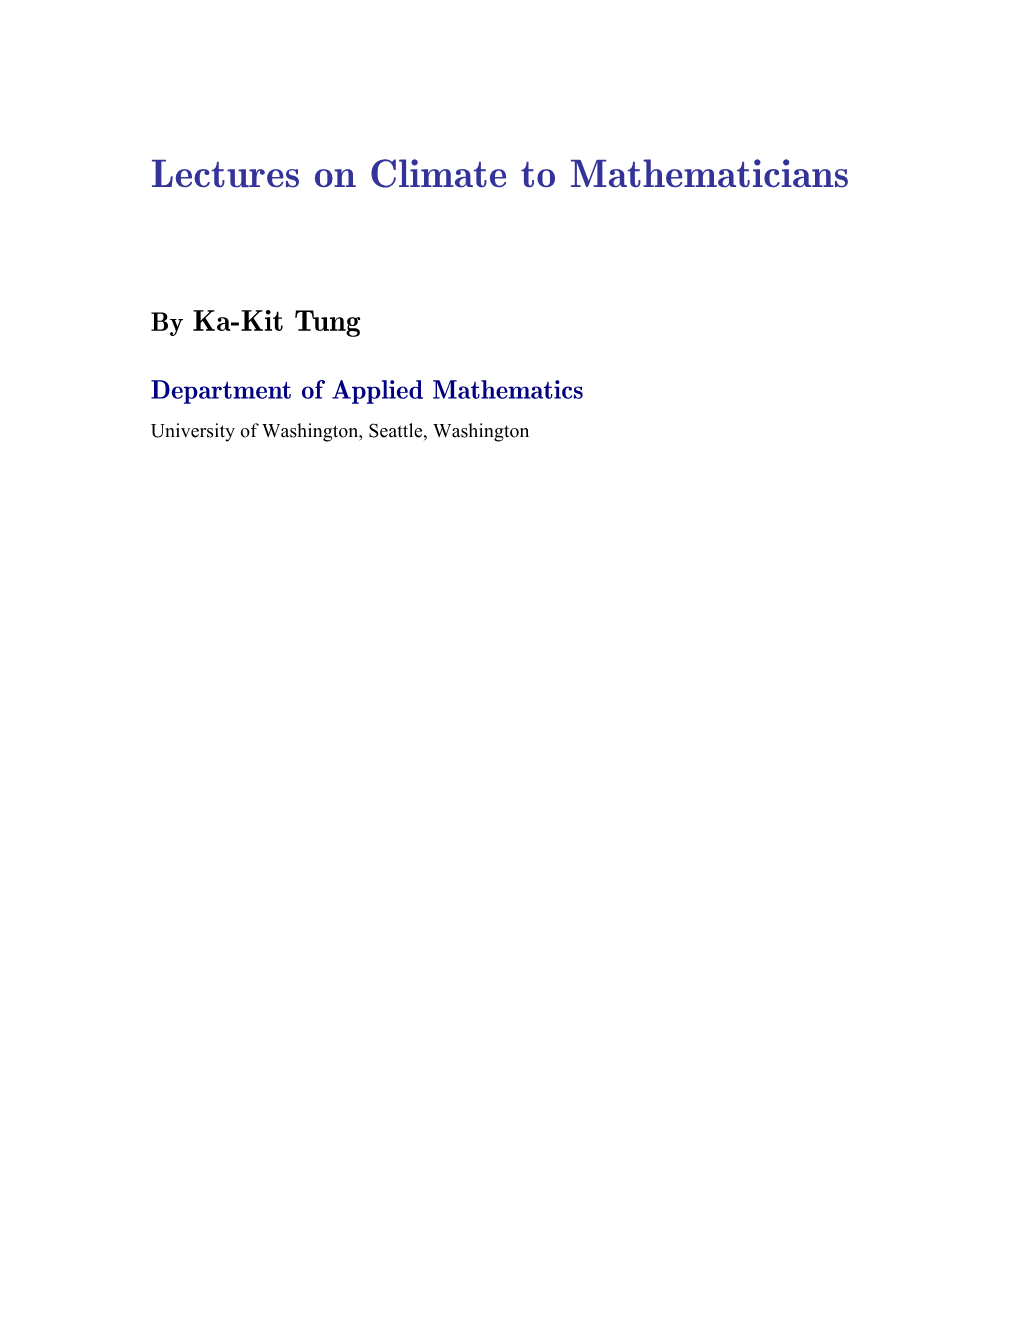 Lectures on Climate to Mathematicians